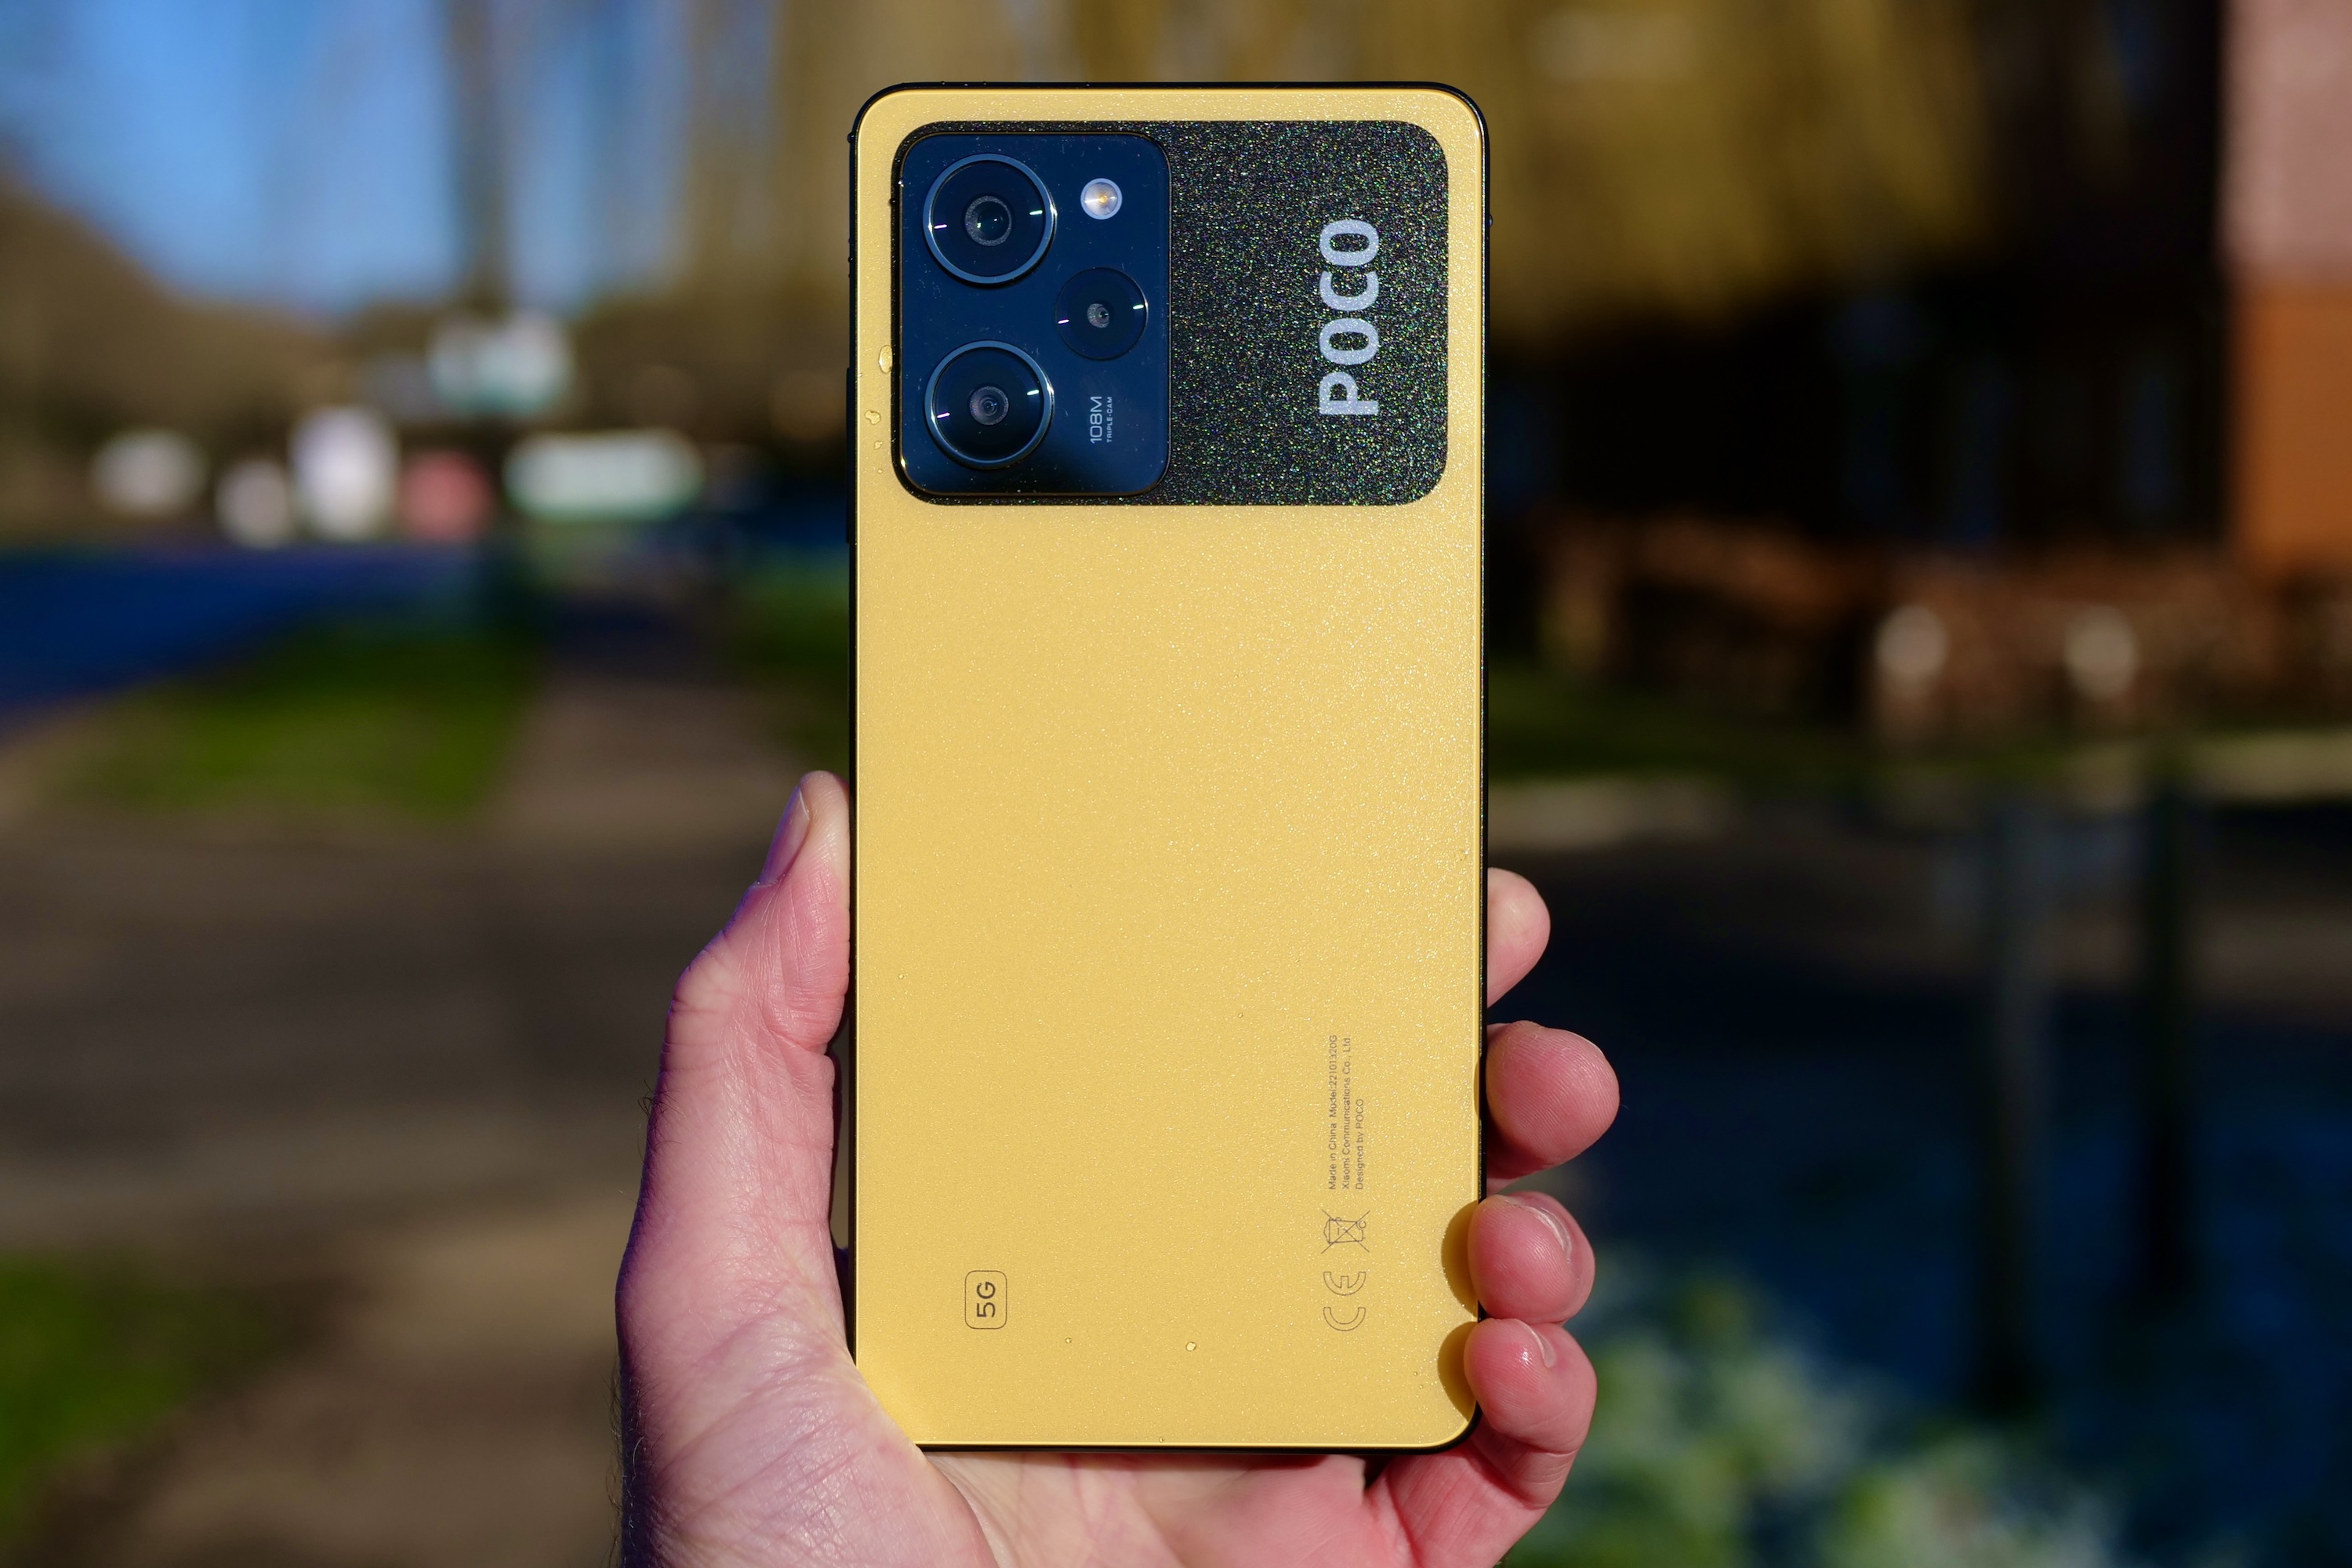 Poco X5 Pro review: is this bright yellow phone any good?